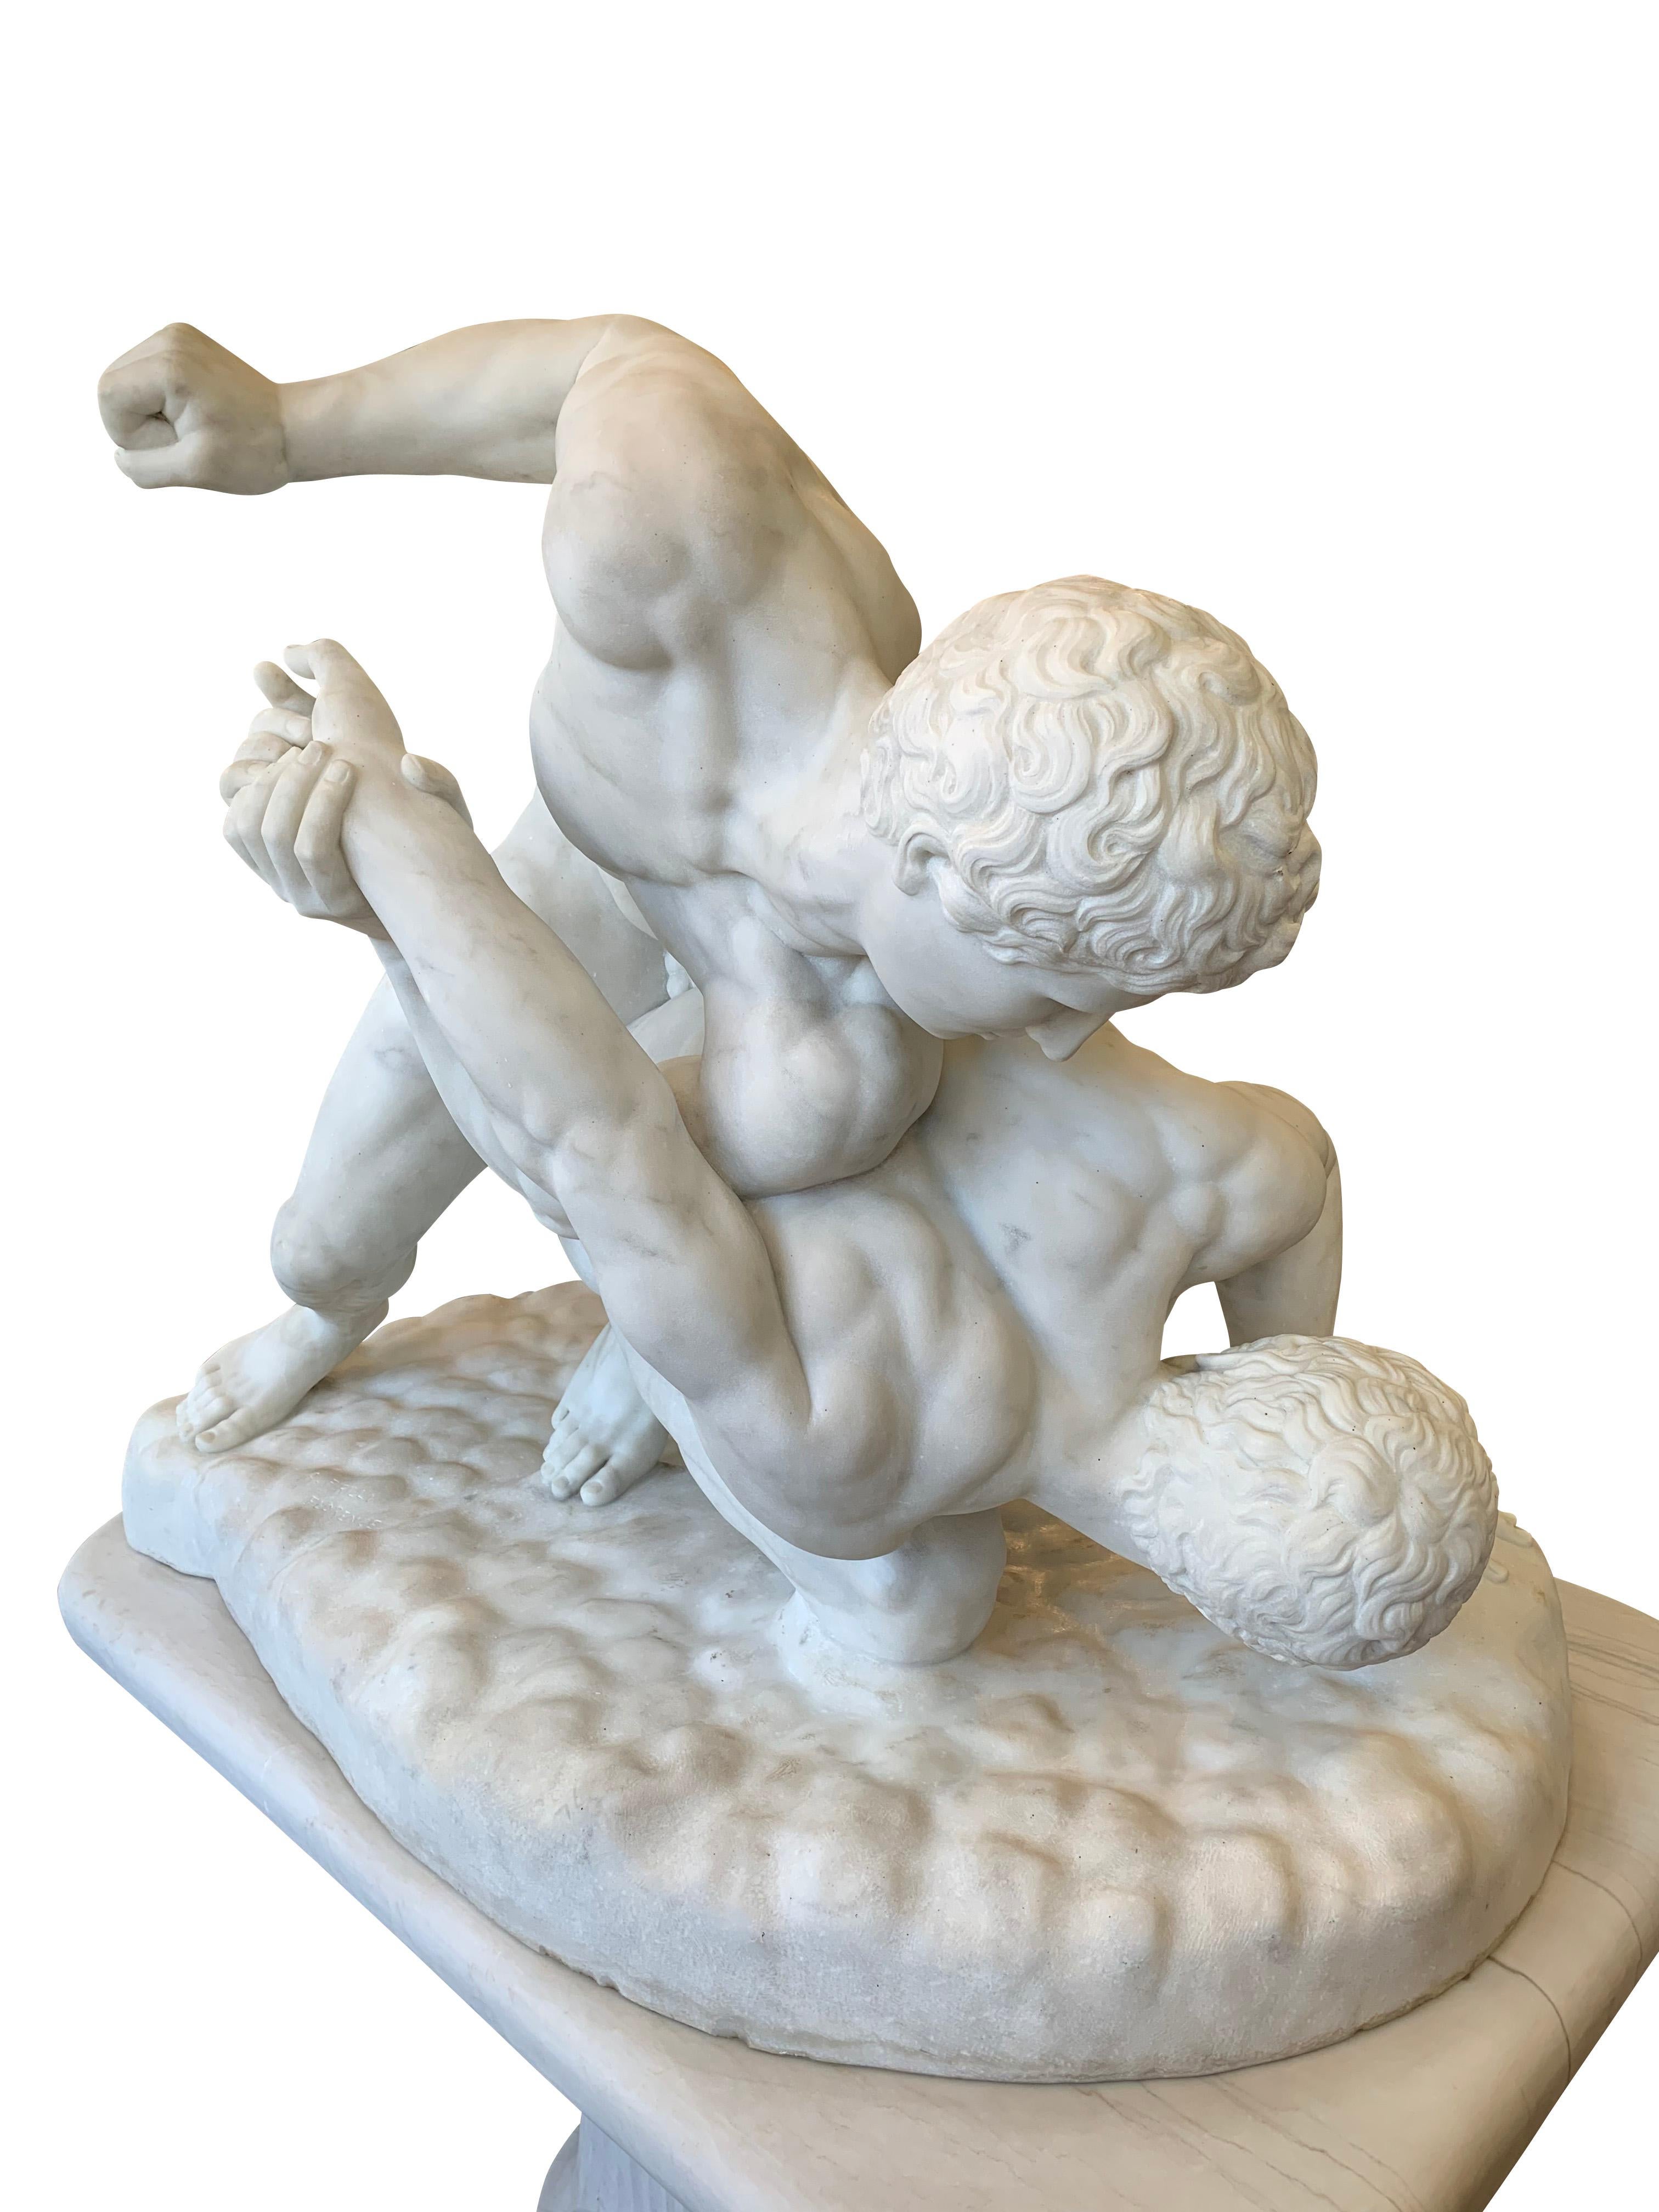 Life Size 19th Century Italian White Marble Sculpture Titled 